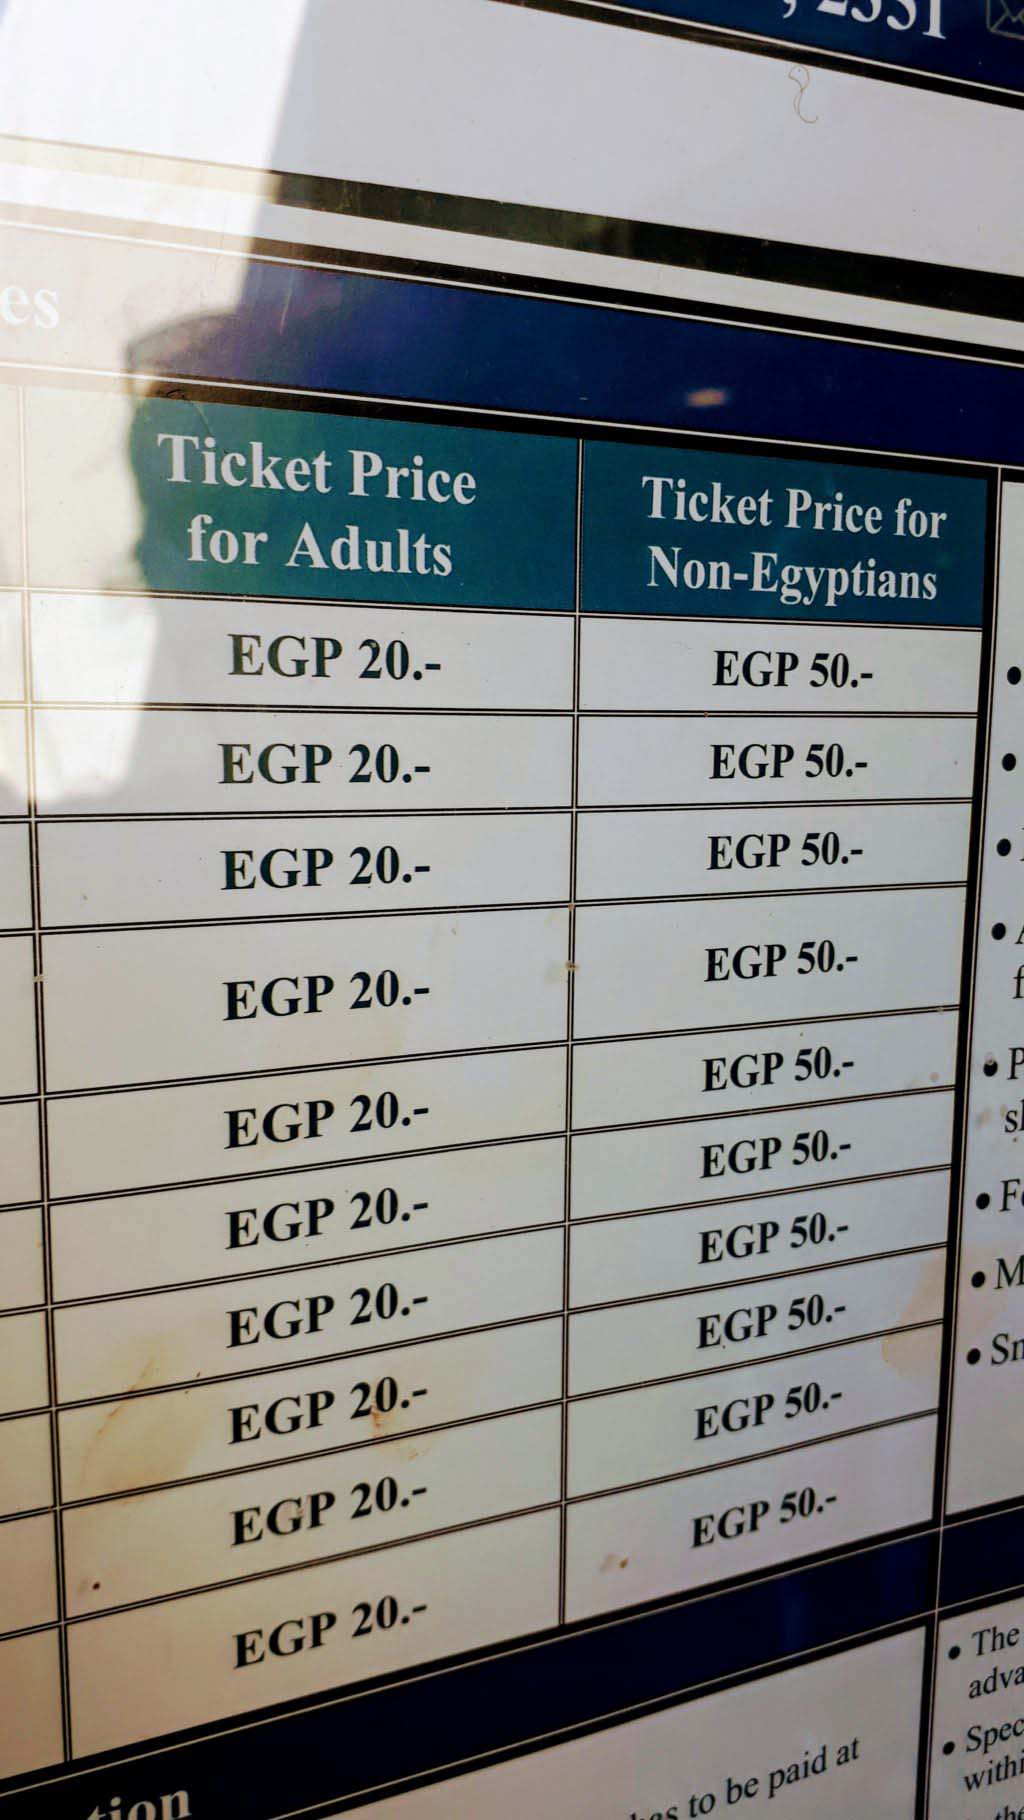 Various ticket prices for Egyptians and non-Egyptians